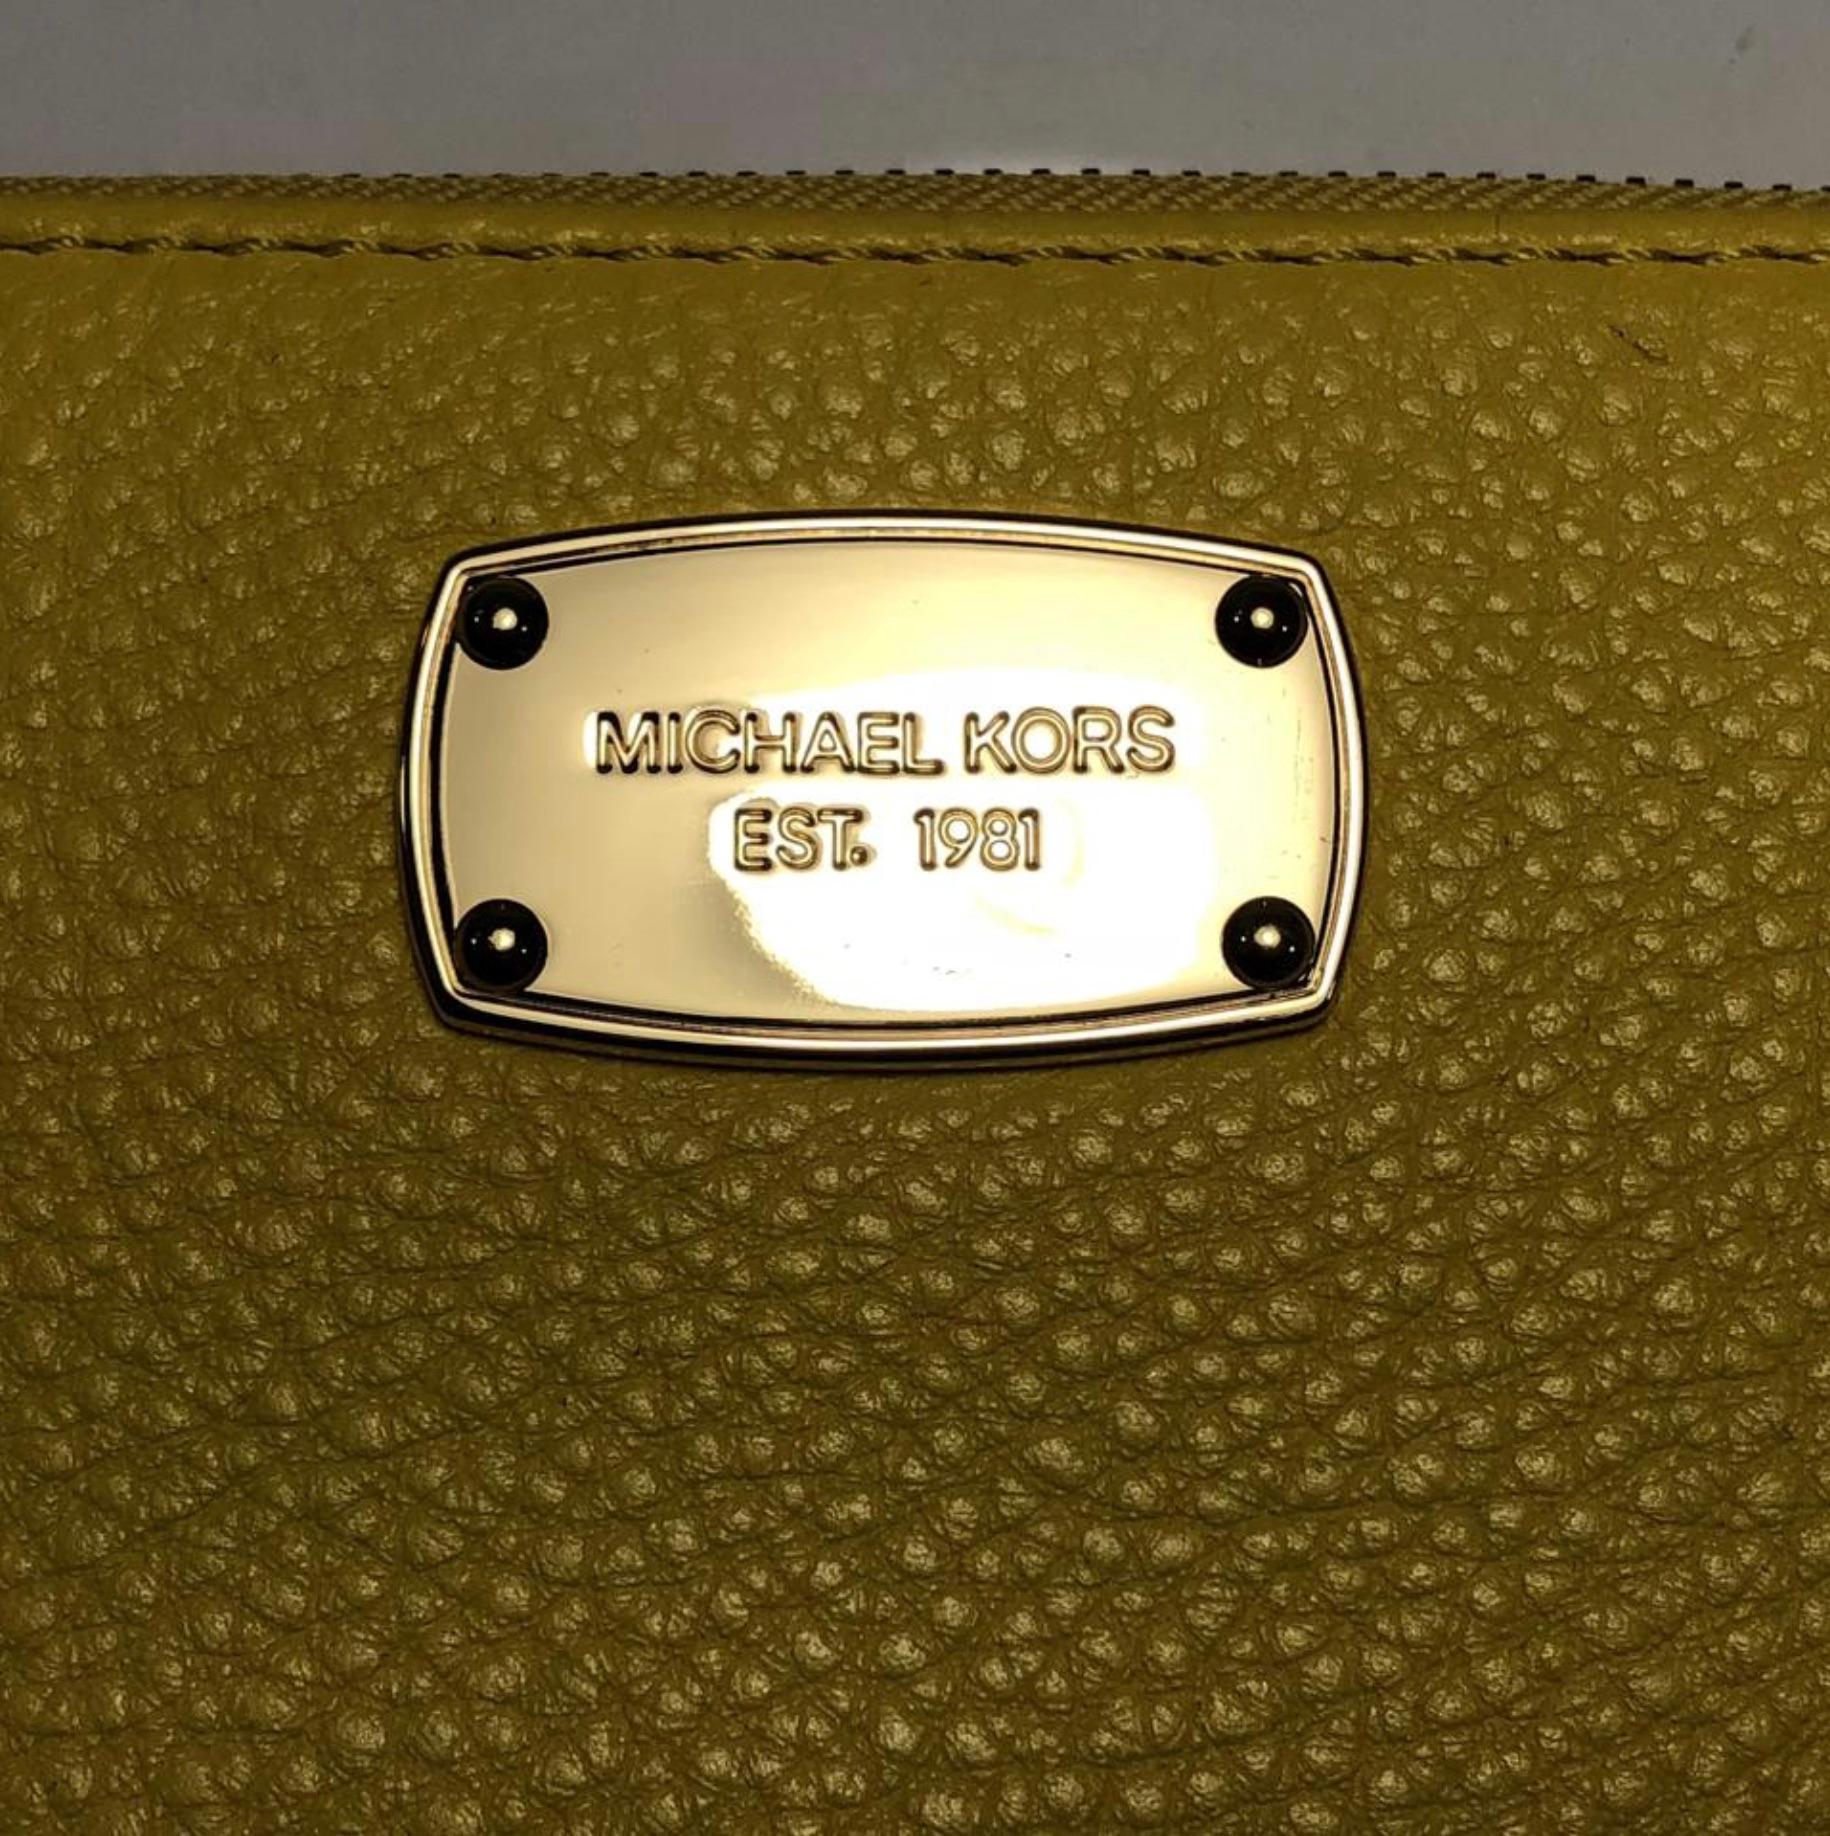 MODEL - Michael Kors Leather Long Zipper Wallet in Yellow

CONDITION - NEW!

SKU - 102-TF

ORIGINAL RETAIL PRICE - 150 + tax

DATE/SERIAL CODE - NA

PRODUCTION - Approximately 2010 onward

DIMENSIONS - L8 x H4 x D1

STRAP/HANDLE DROP - NA

MATERIAL